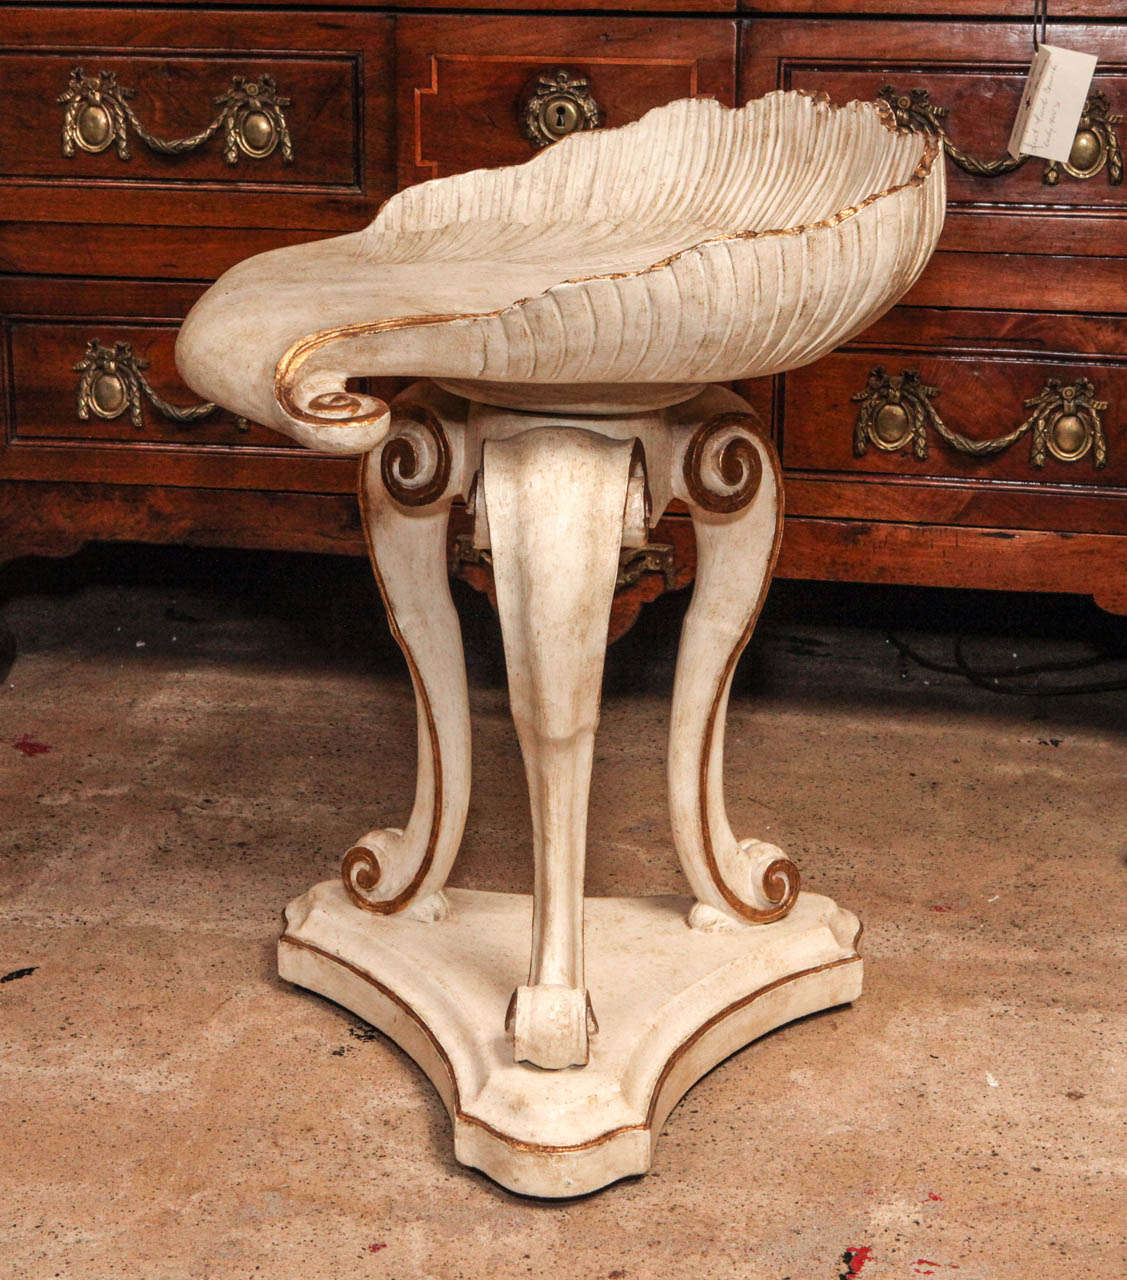 Hand-painted, parcel-gilt, tripod, Venetian grotto stool with adjustable, shell-style seat.